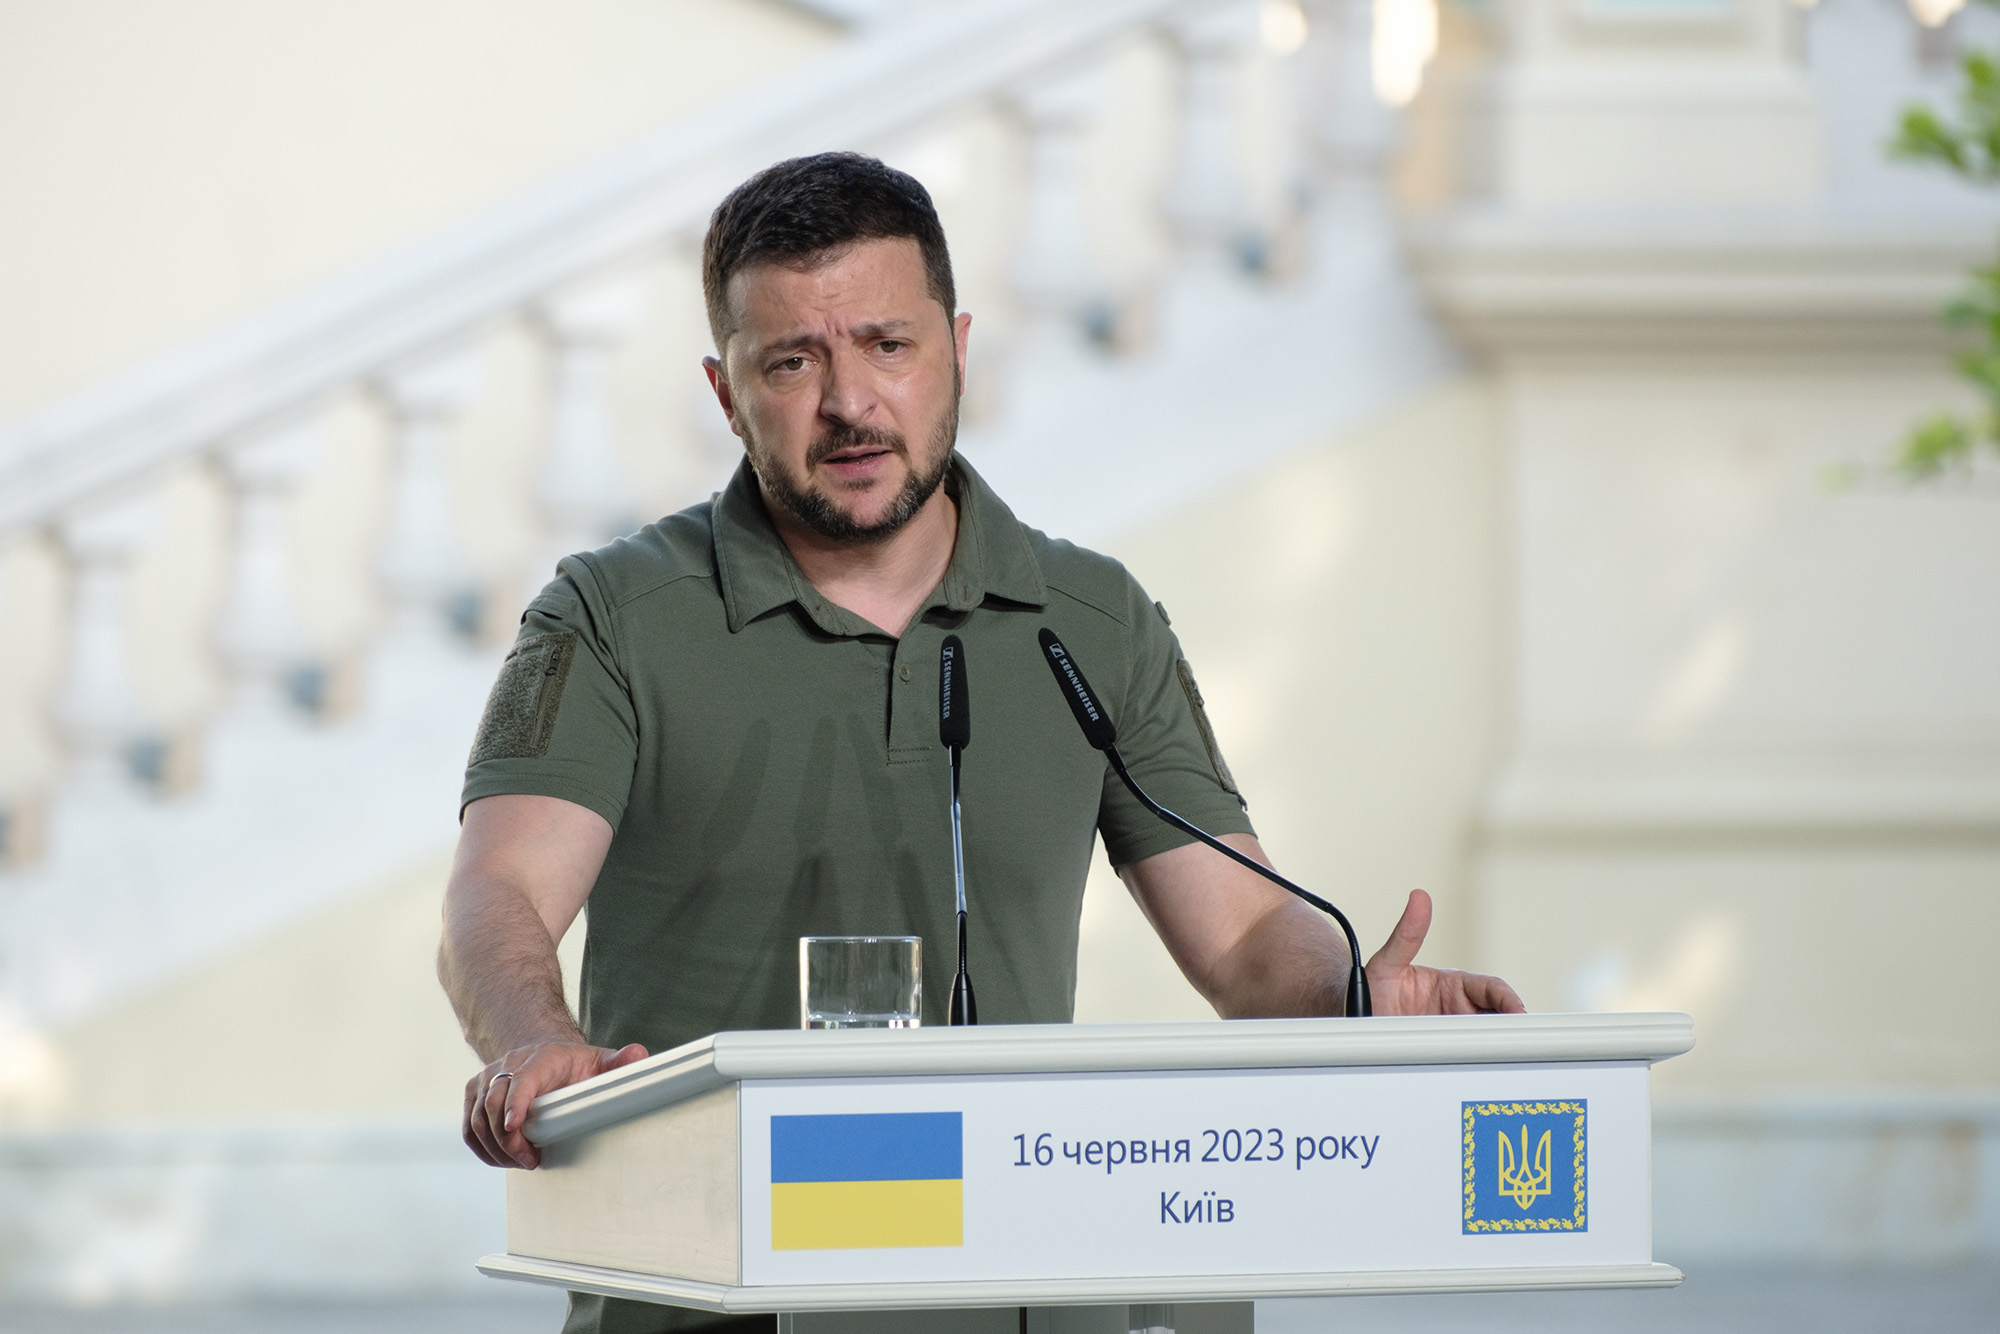 Ukrainian President Volodymyr Zelensky speaks during a joint press conference with leaders of African countries on June 16, 2023 in Kyiv, Ukraine.